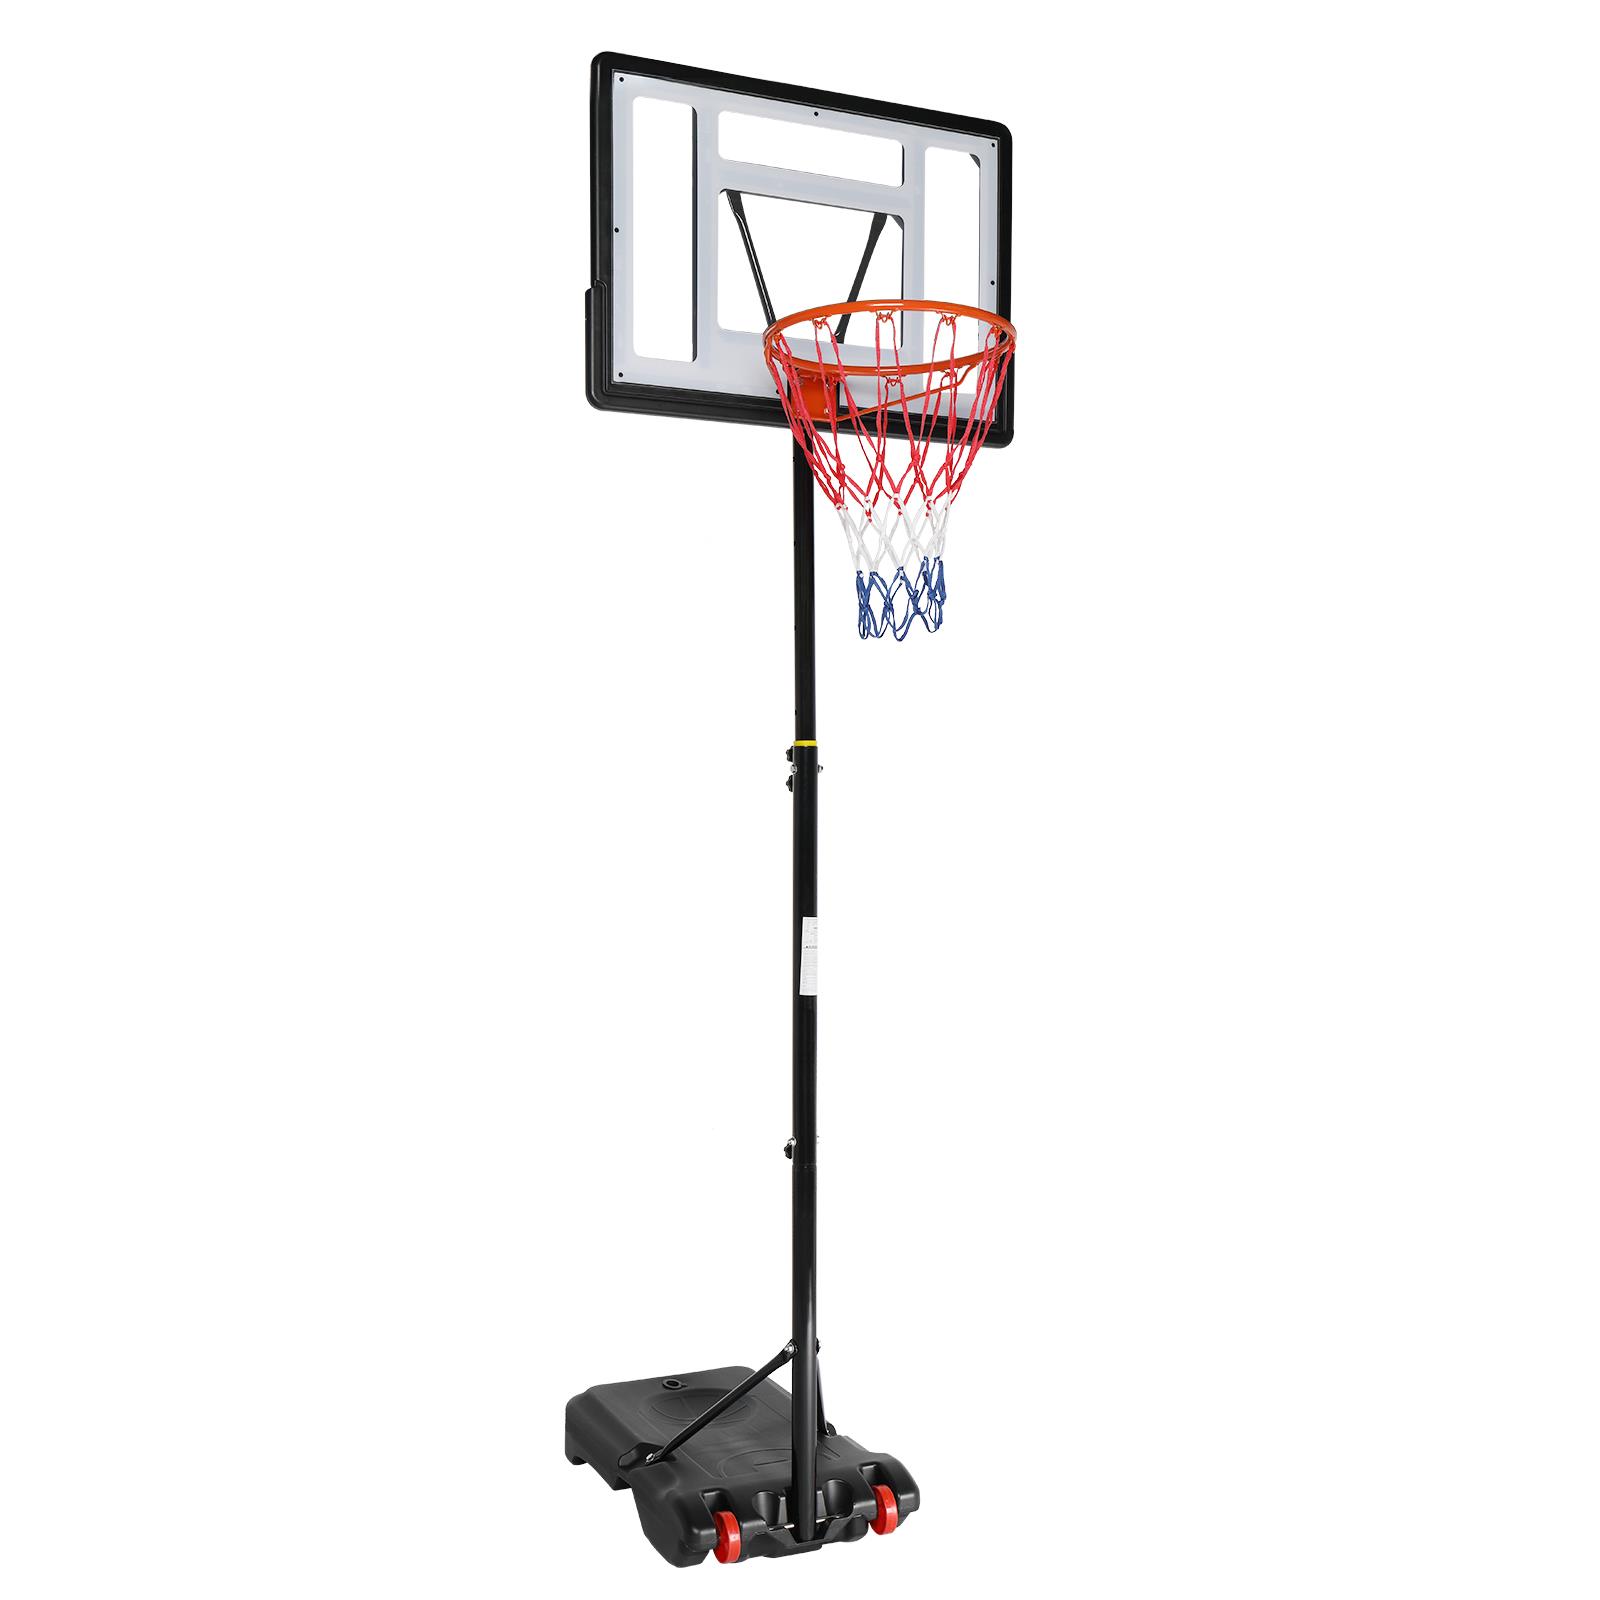 Zimtown 6.5ft-8ft Portable Basketball Hoop System Stand, Height Adjustable Basketball Goal, with 32"W PVC Backboard 2 Nets Wheels, for Youth Kids Teenagers Indoor Outdoor Playing - image 1 of 8